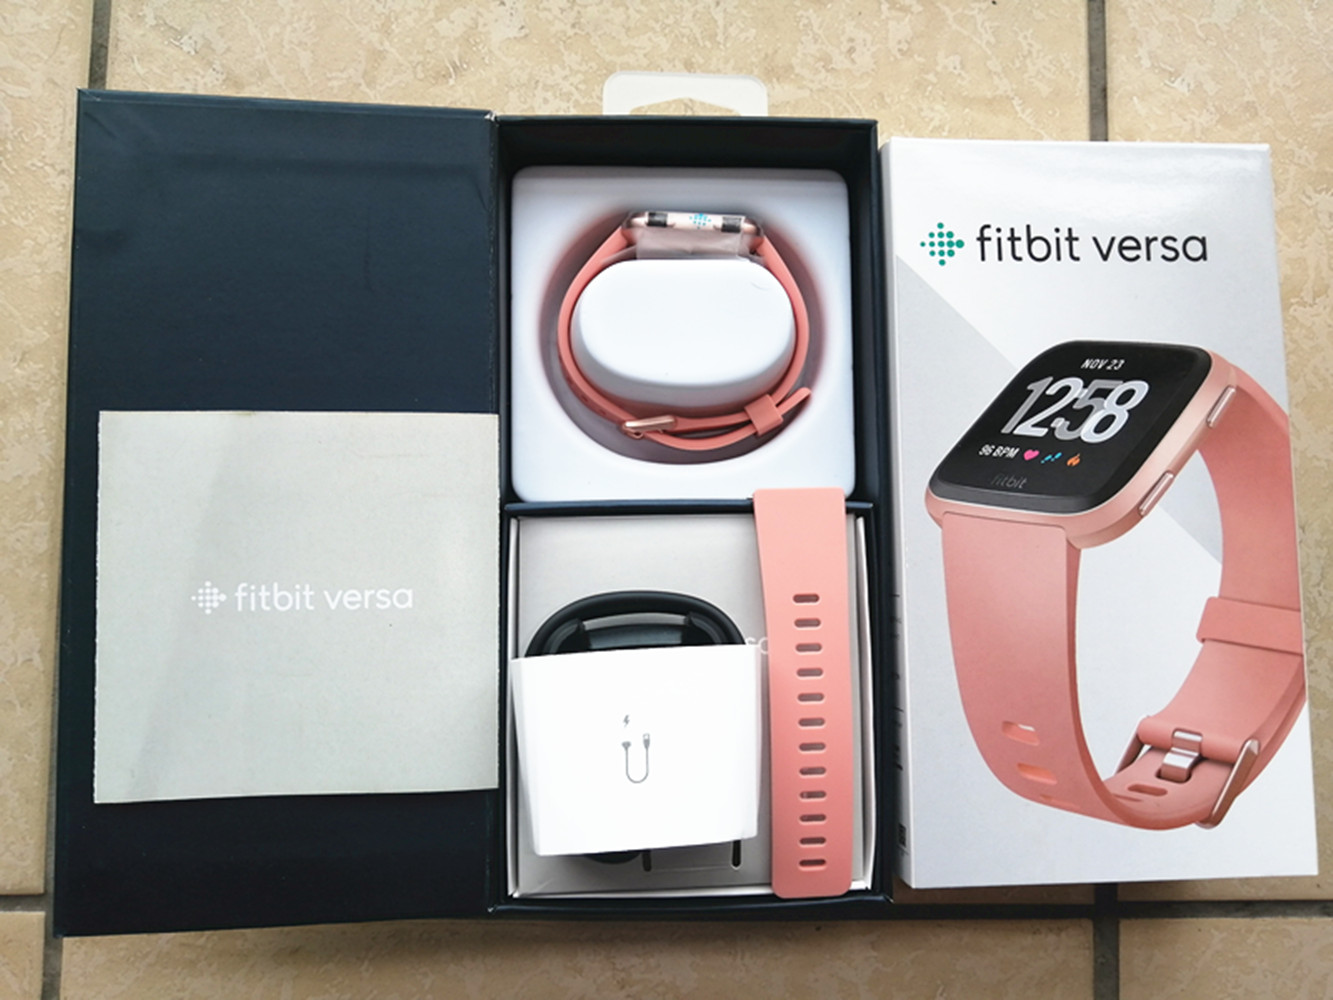 Pink New Fitbit Versa Smartwatch Fitness Activity Tracker with L&S Bands